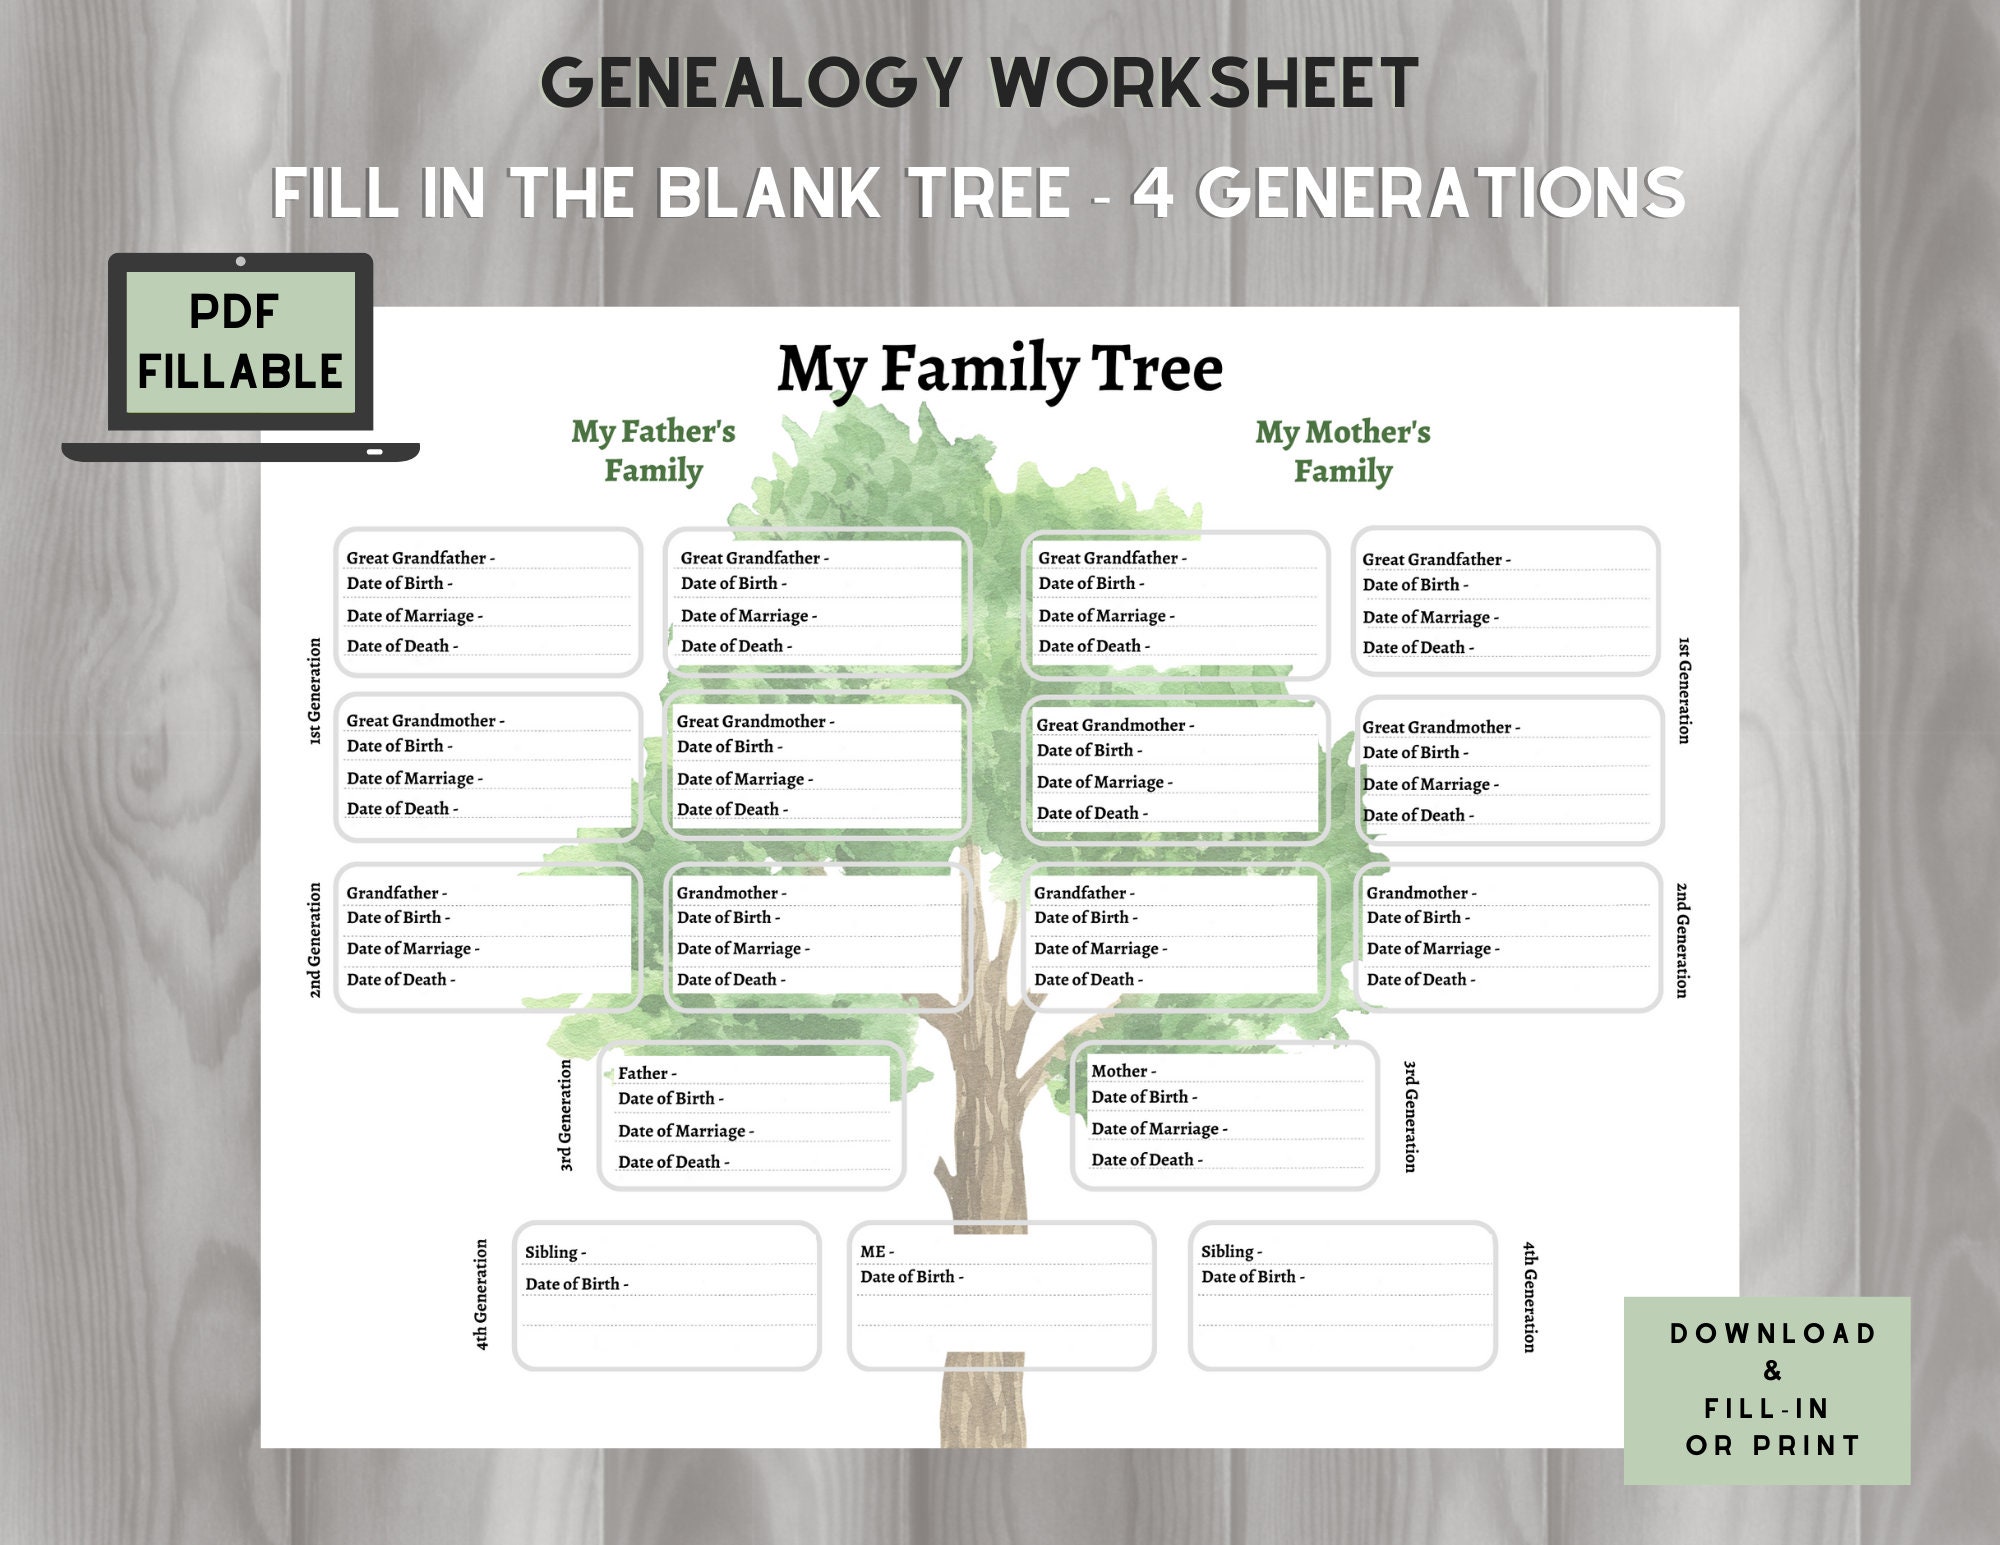 Family Tree Fill-in the Blank 4 Generations 1 Page Fillable PDF - Etsy